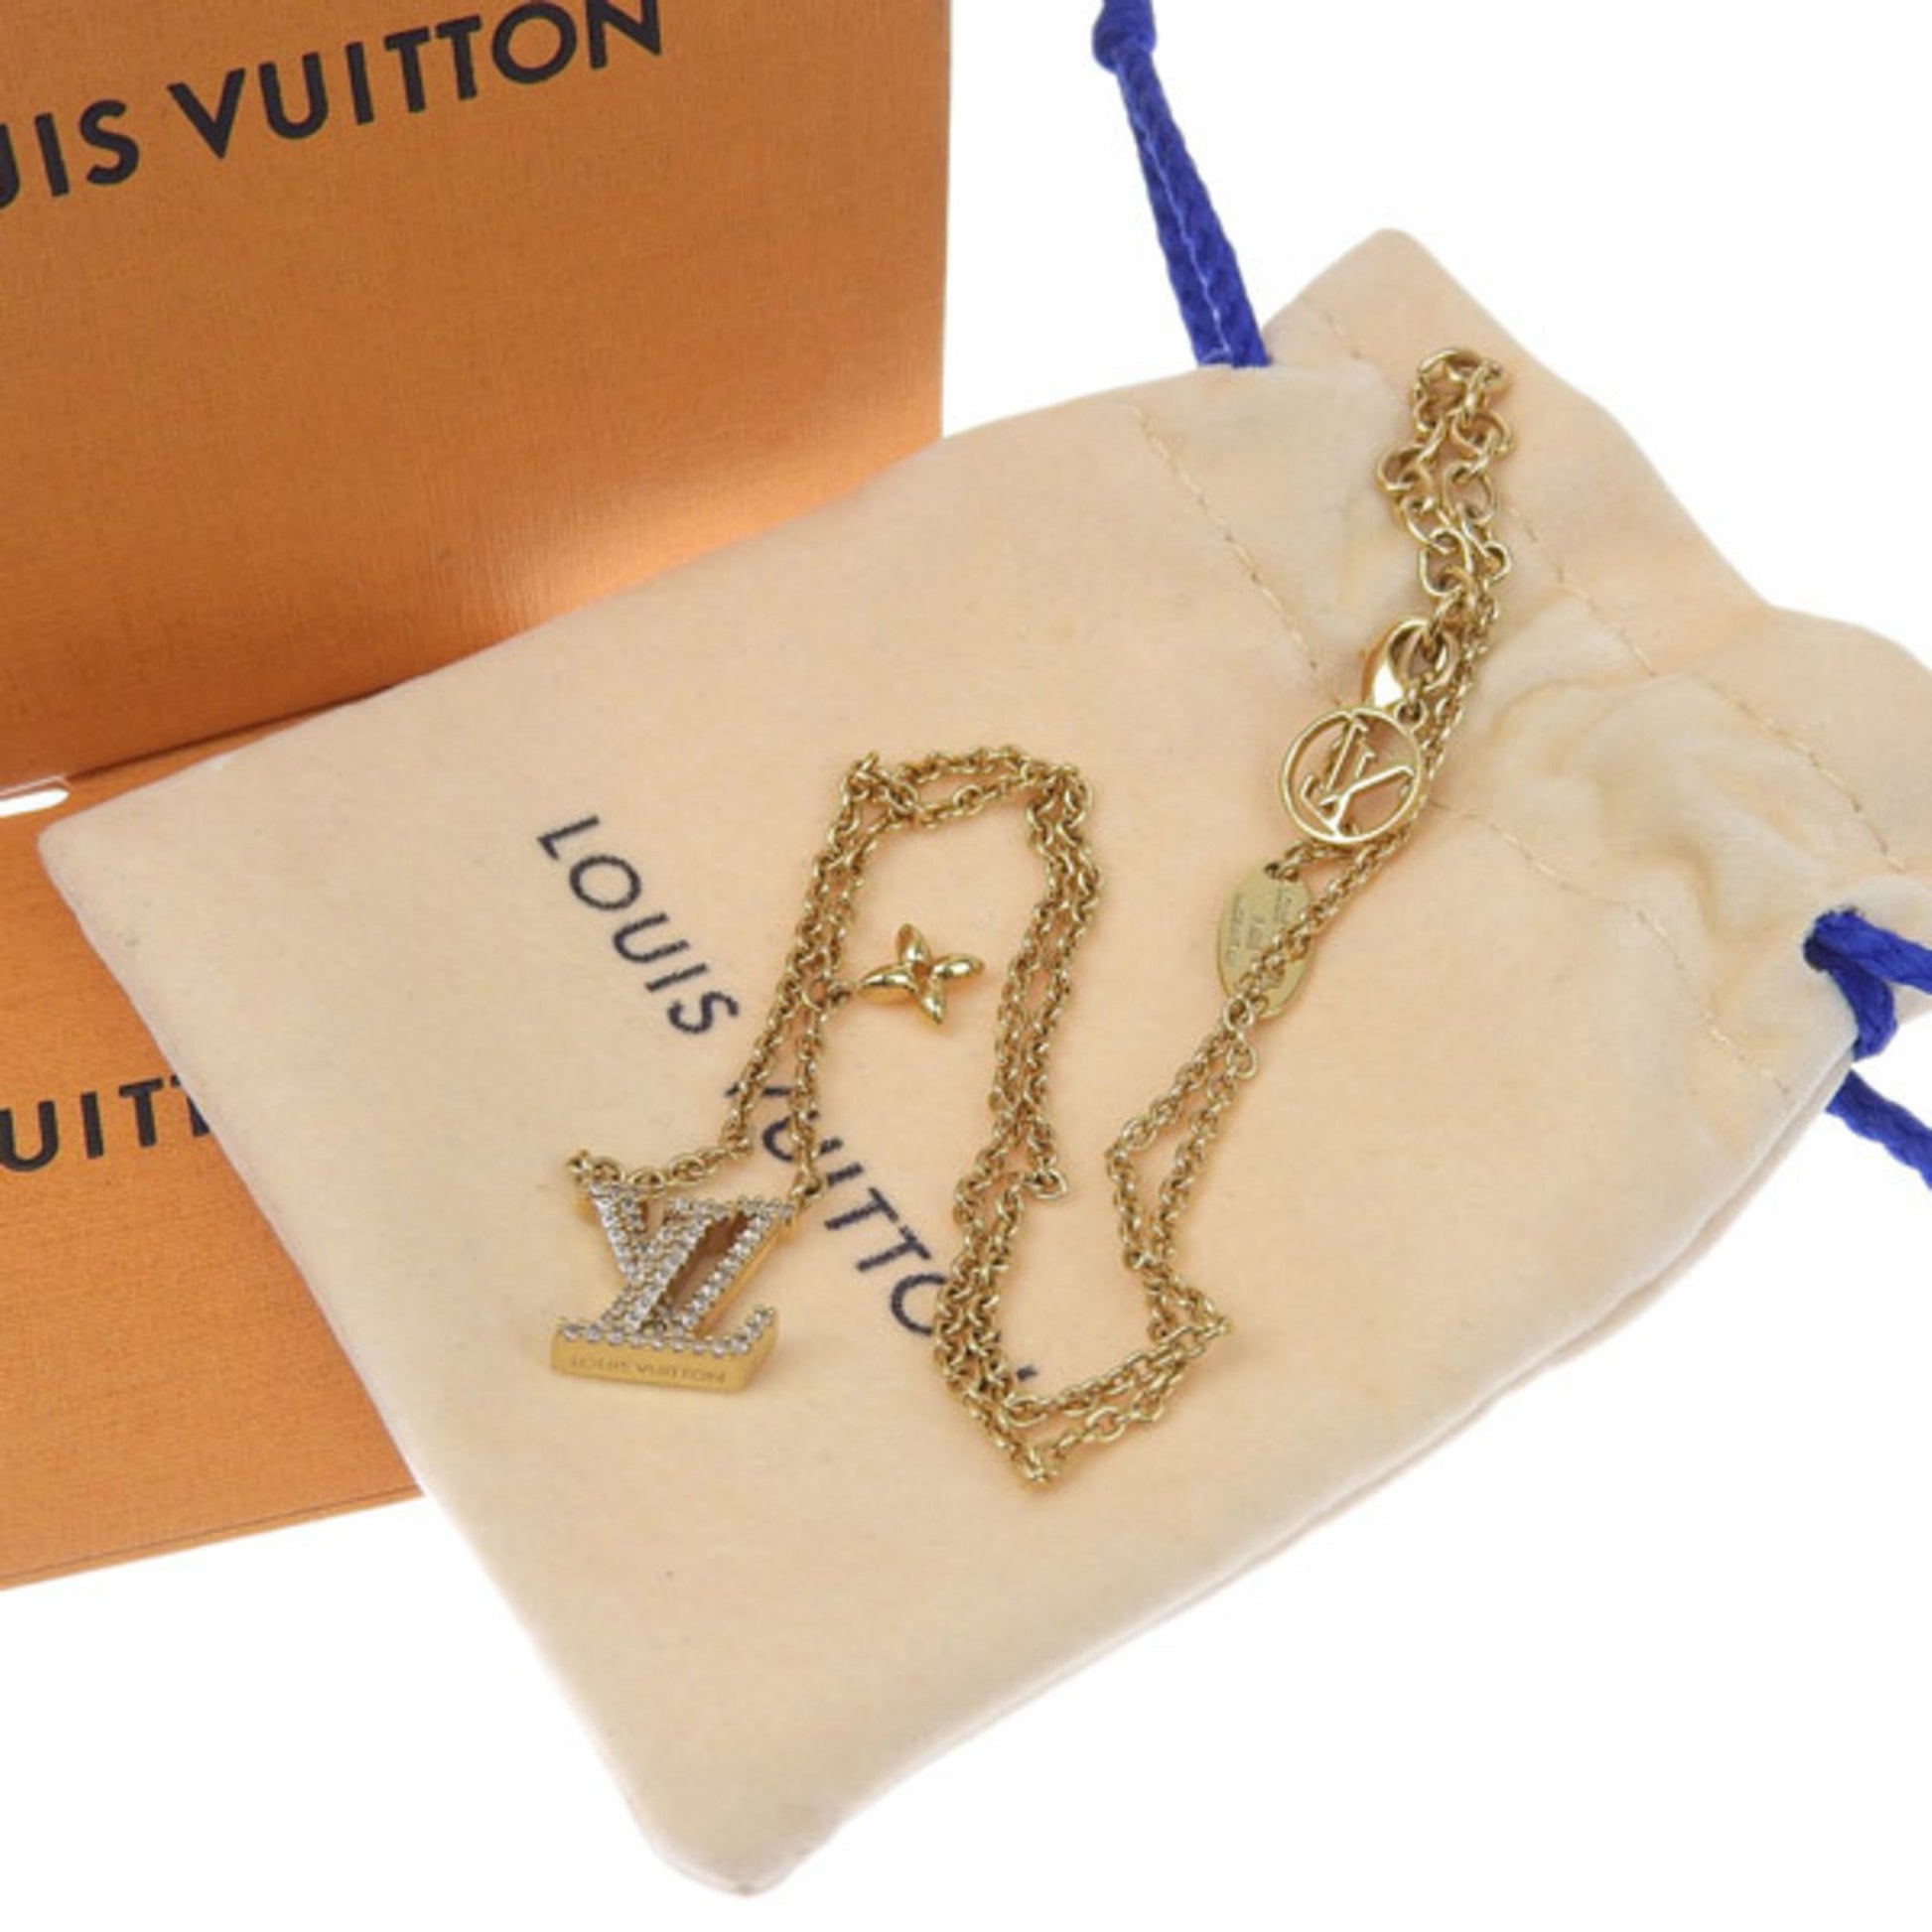 LOUIS VUITTON Rhinestone Collier LV Iconic Necklace M00596 Gold